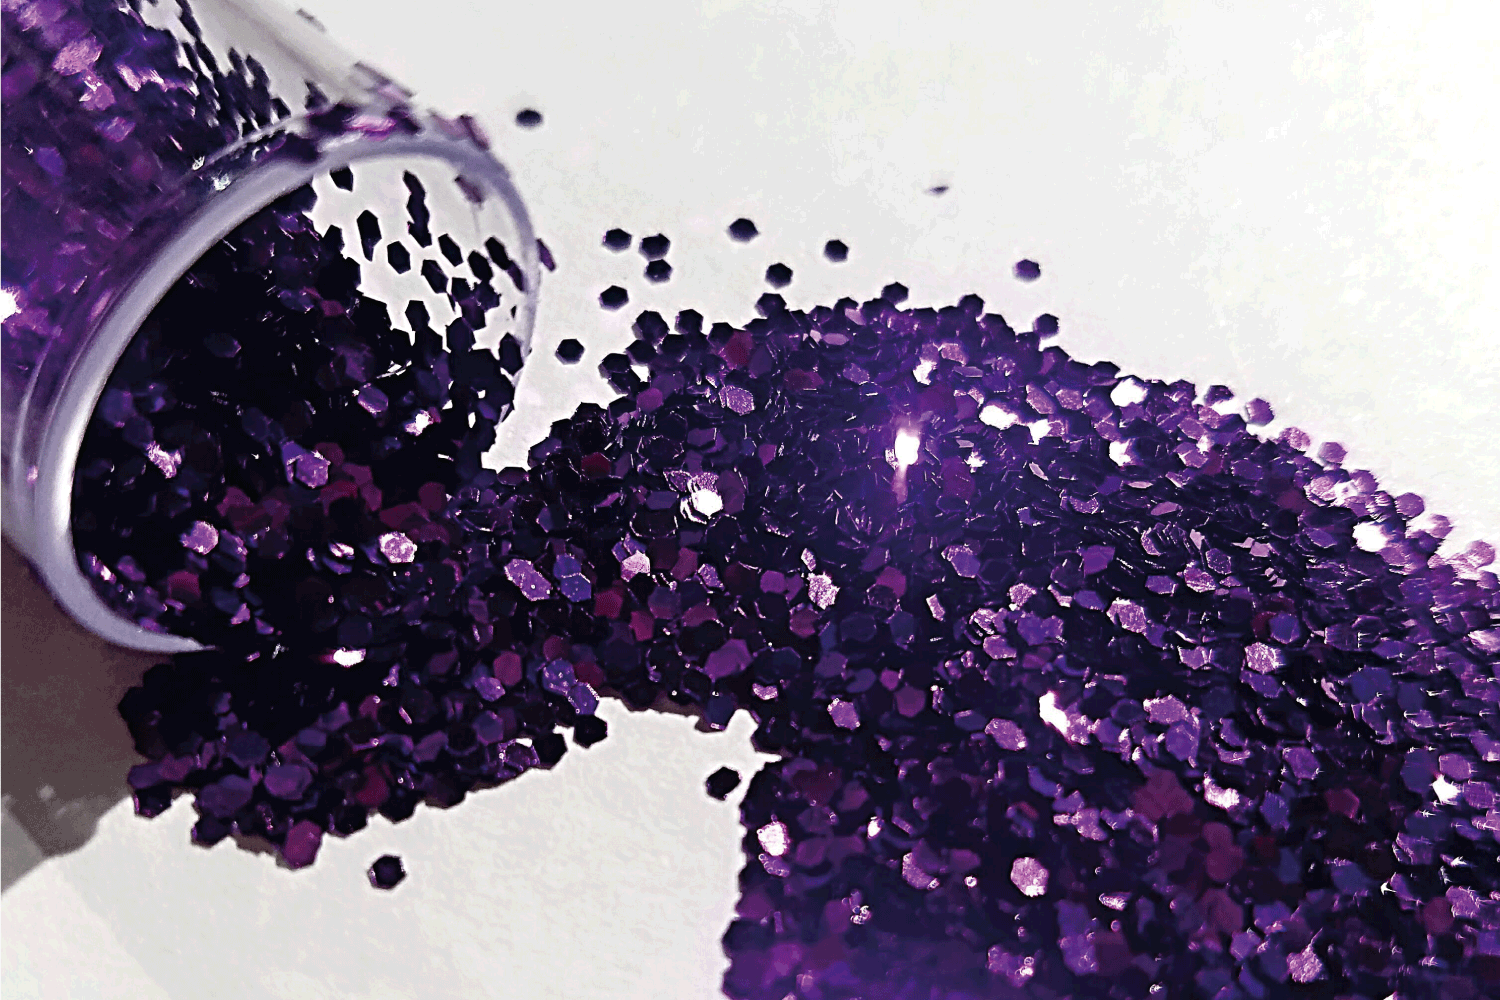 image of purple glitter spilled over a white background